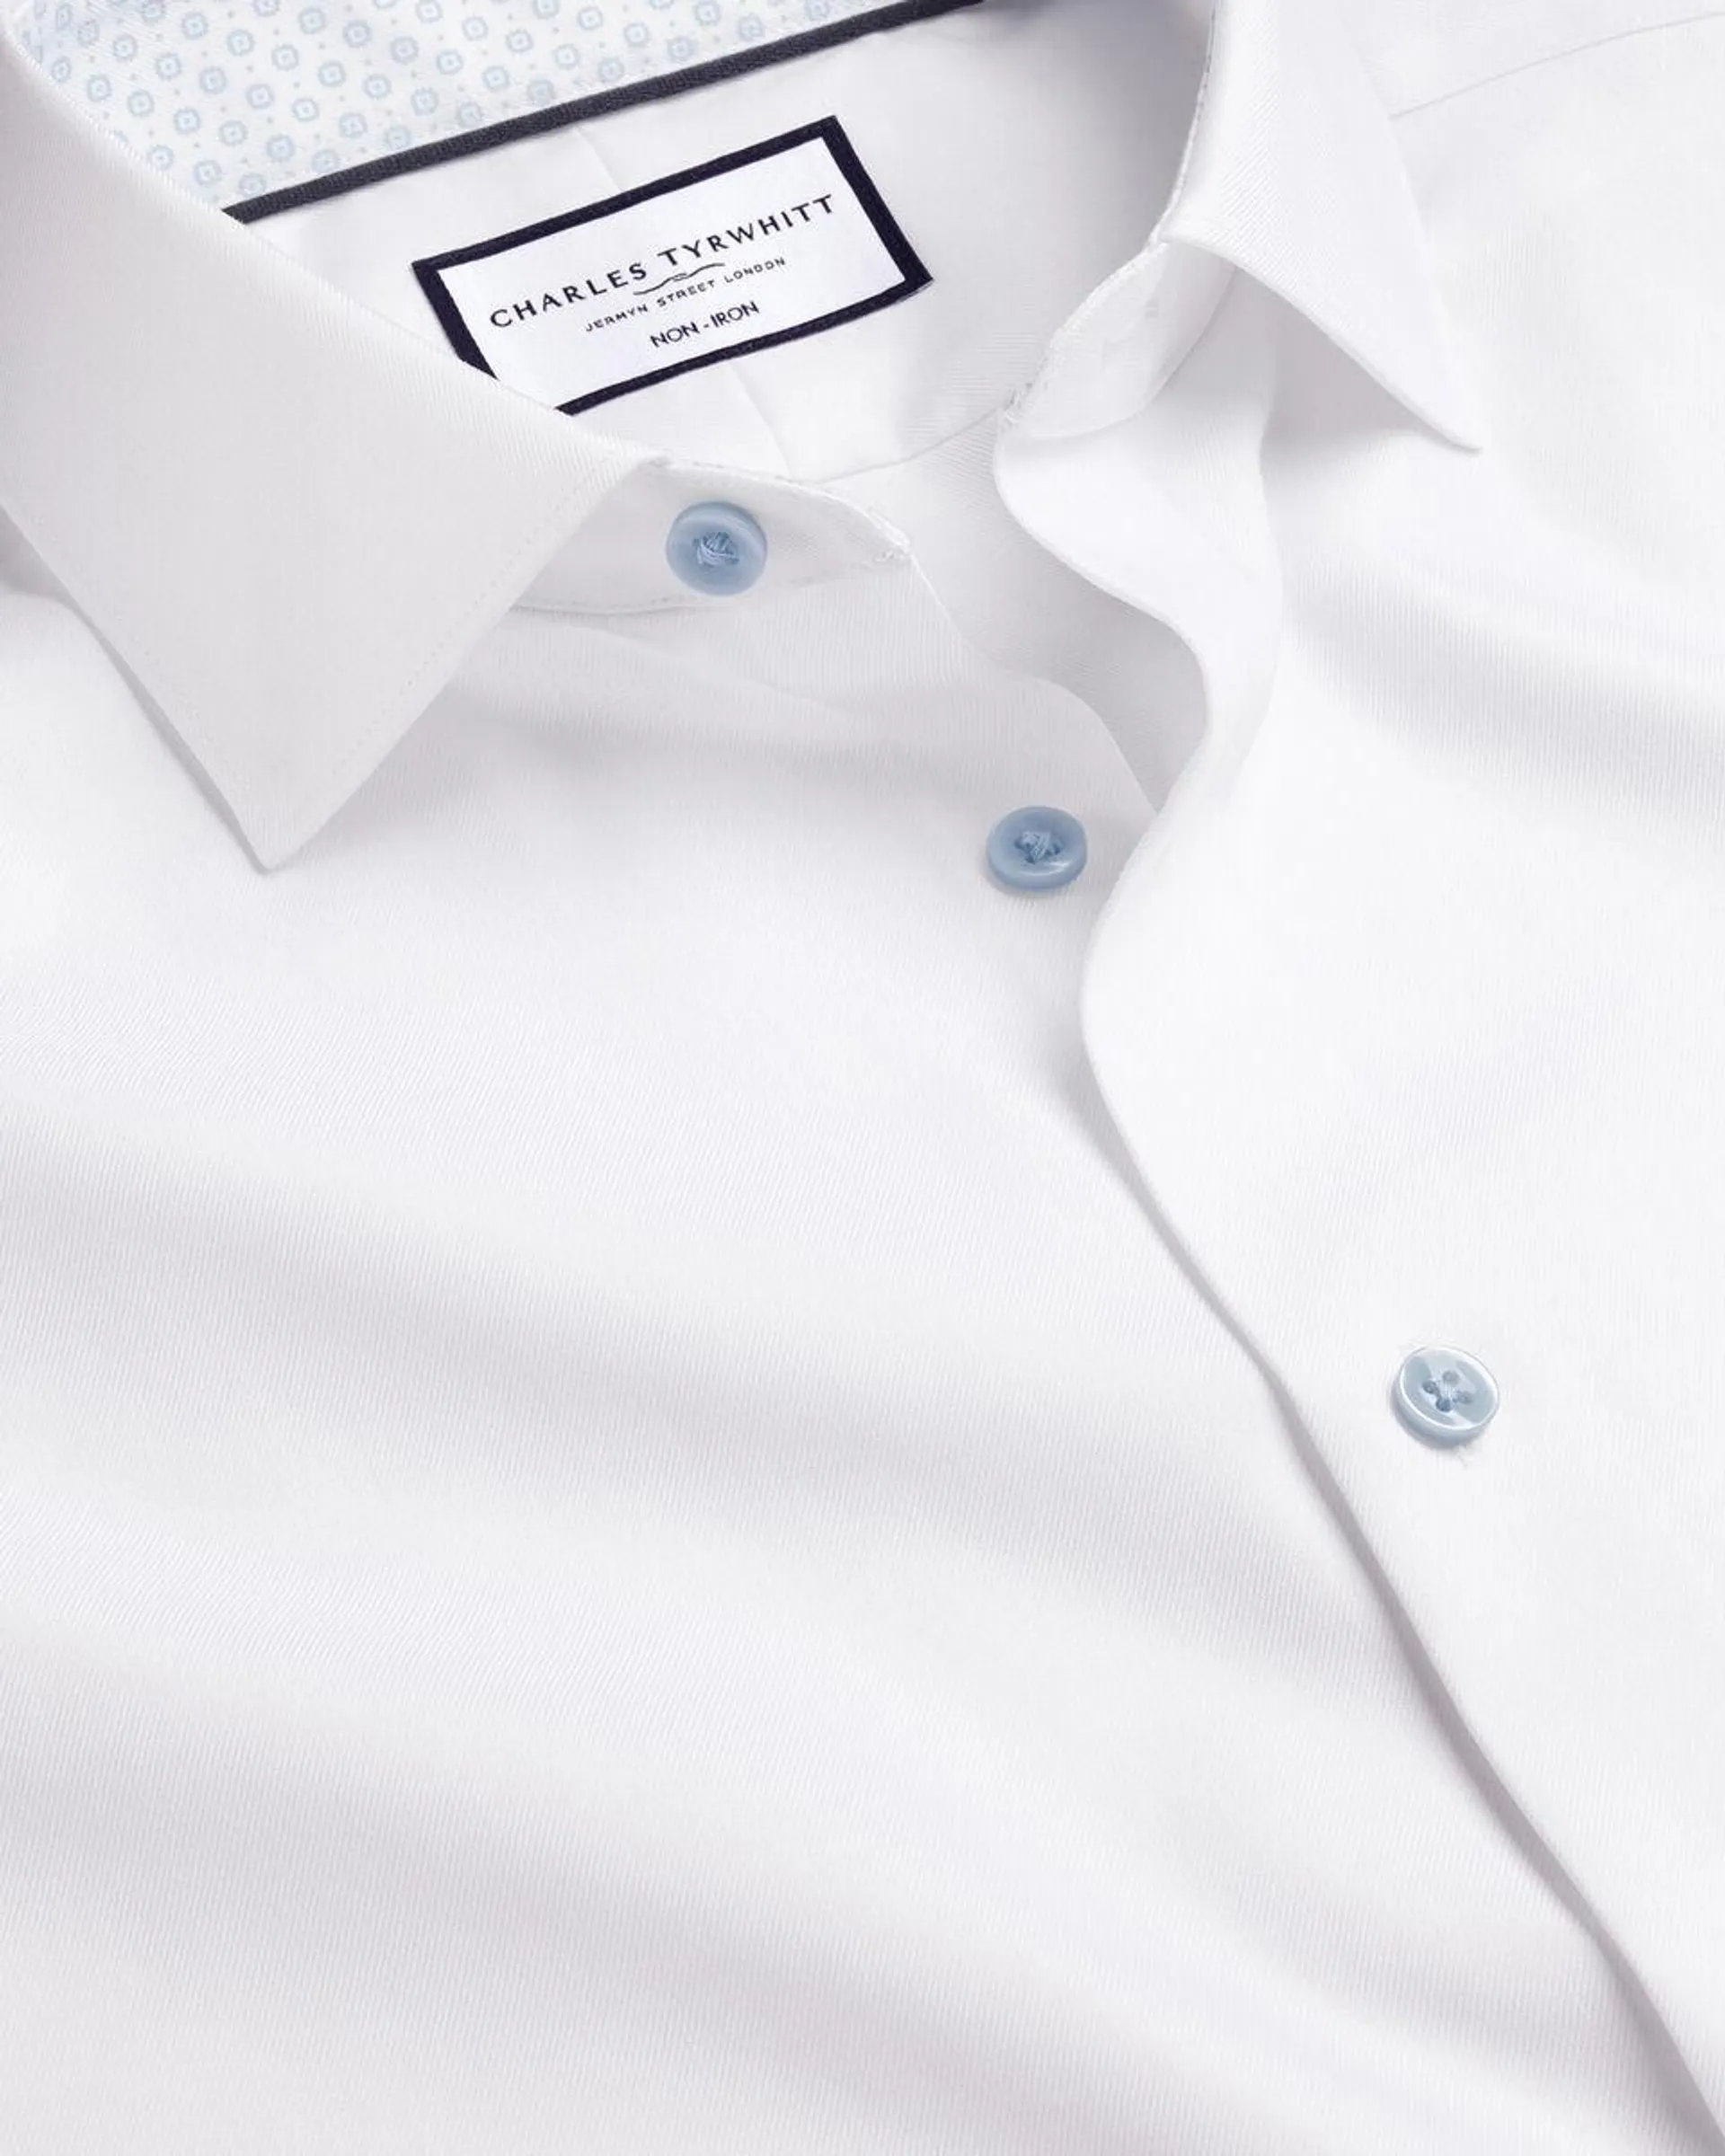 details about product: Semi-Cutaway Non-Iron Collar Twill Shirt with Printed Trim - White